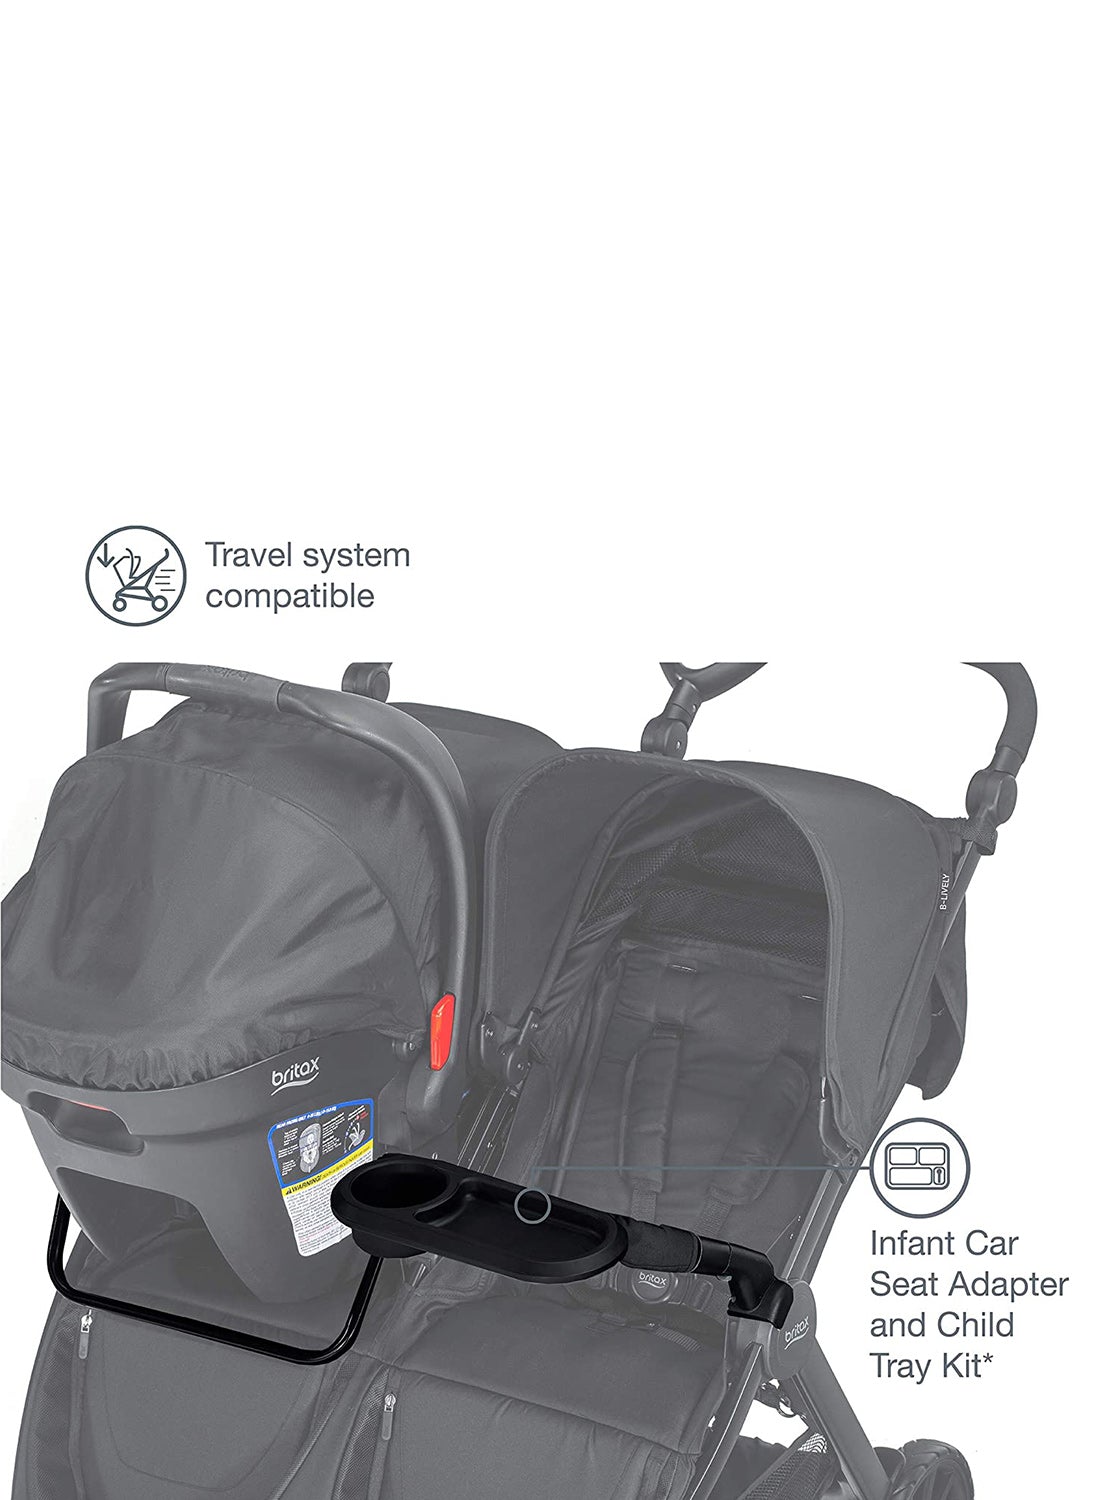 Britax B-Lively Double Stroller Infant Car Seat Adapter & Child Tray Kit - ANB Baby -$75 - $100